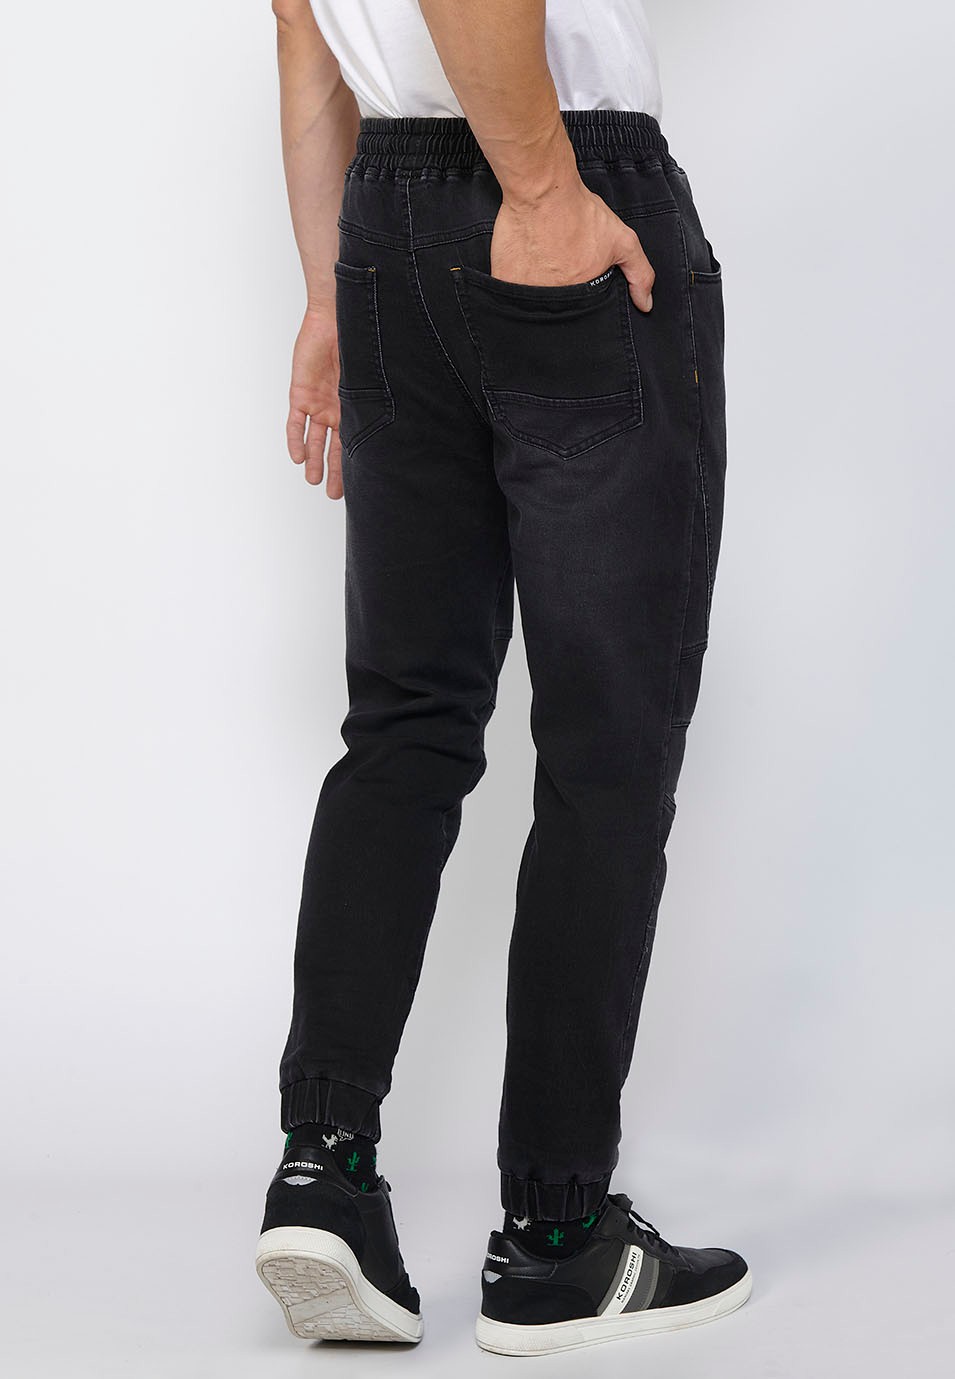 Long slim jogger pants fitted at the ankles with adjustable elastic waist and drawstring in Black for Men 7